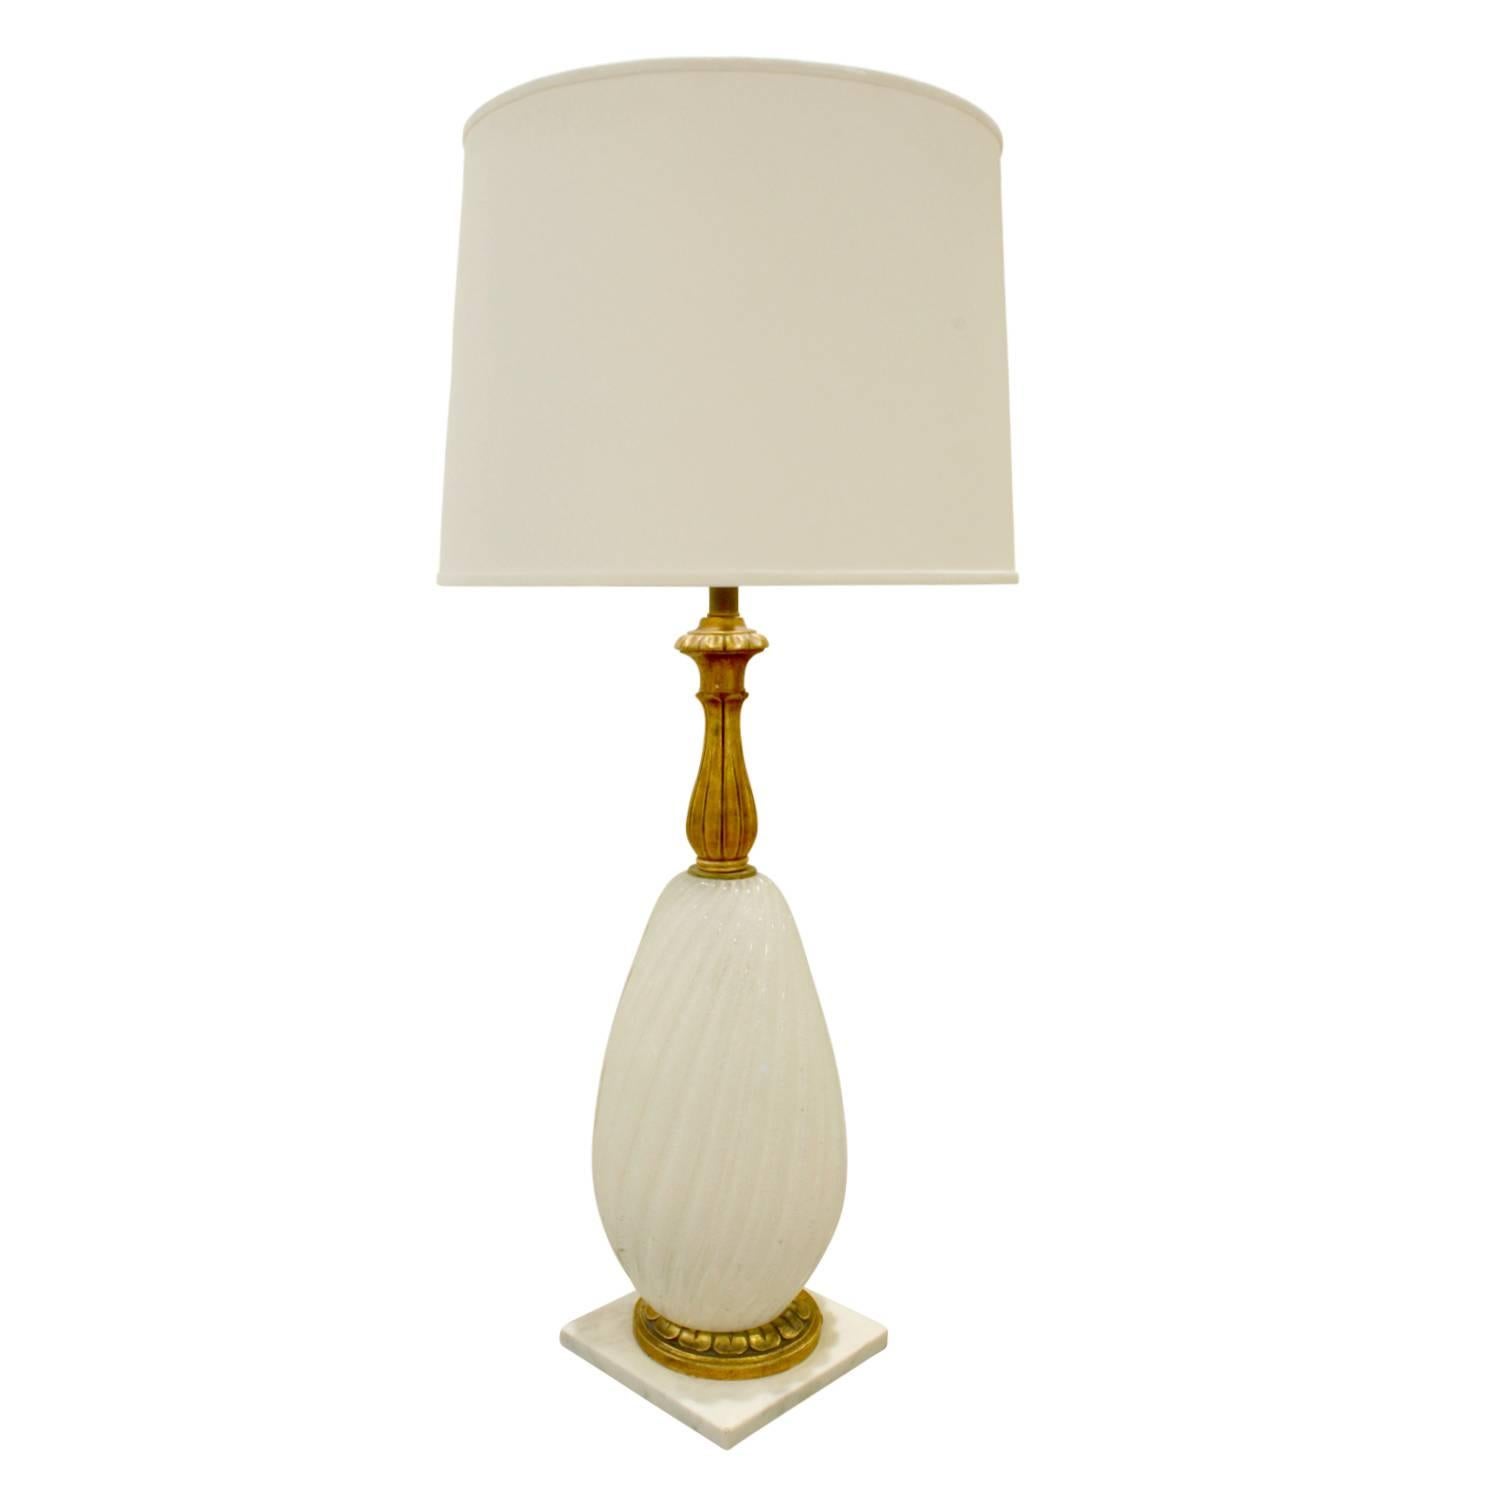 Mid-Century Modern Seguso Pair of Gilded Handblown Glass Table Lamps, 1950s For Sale